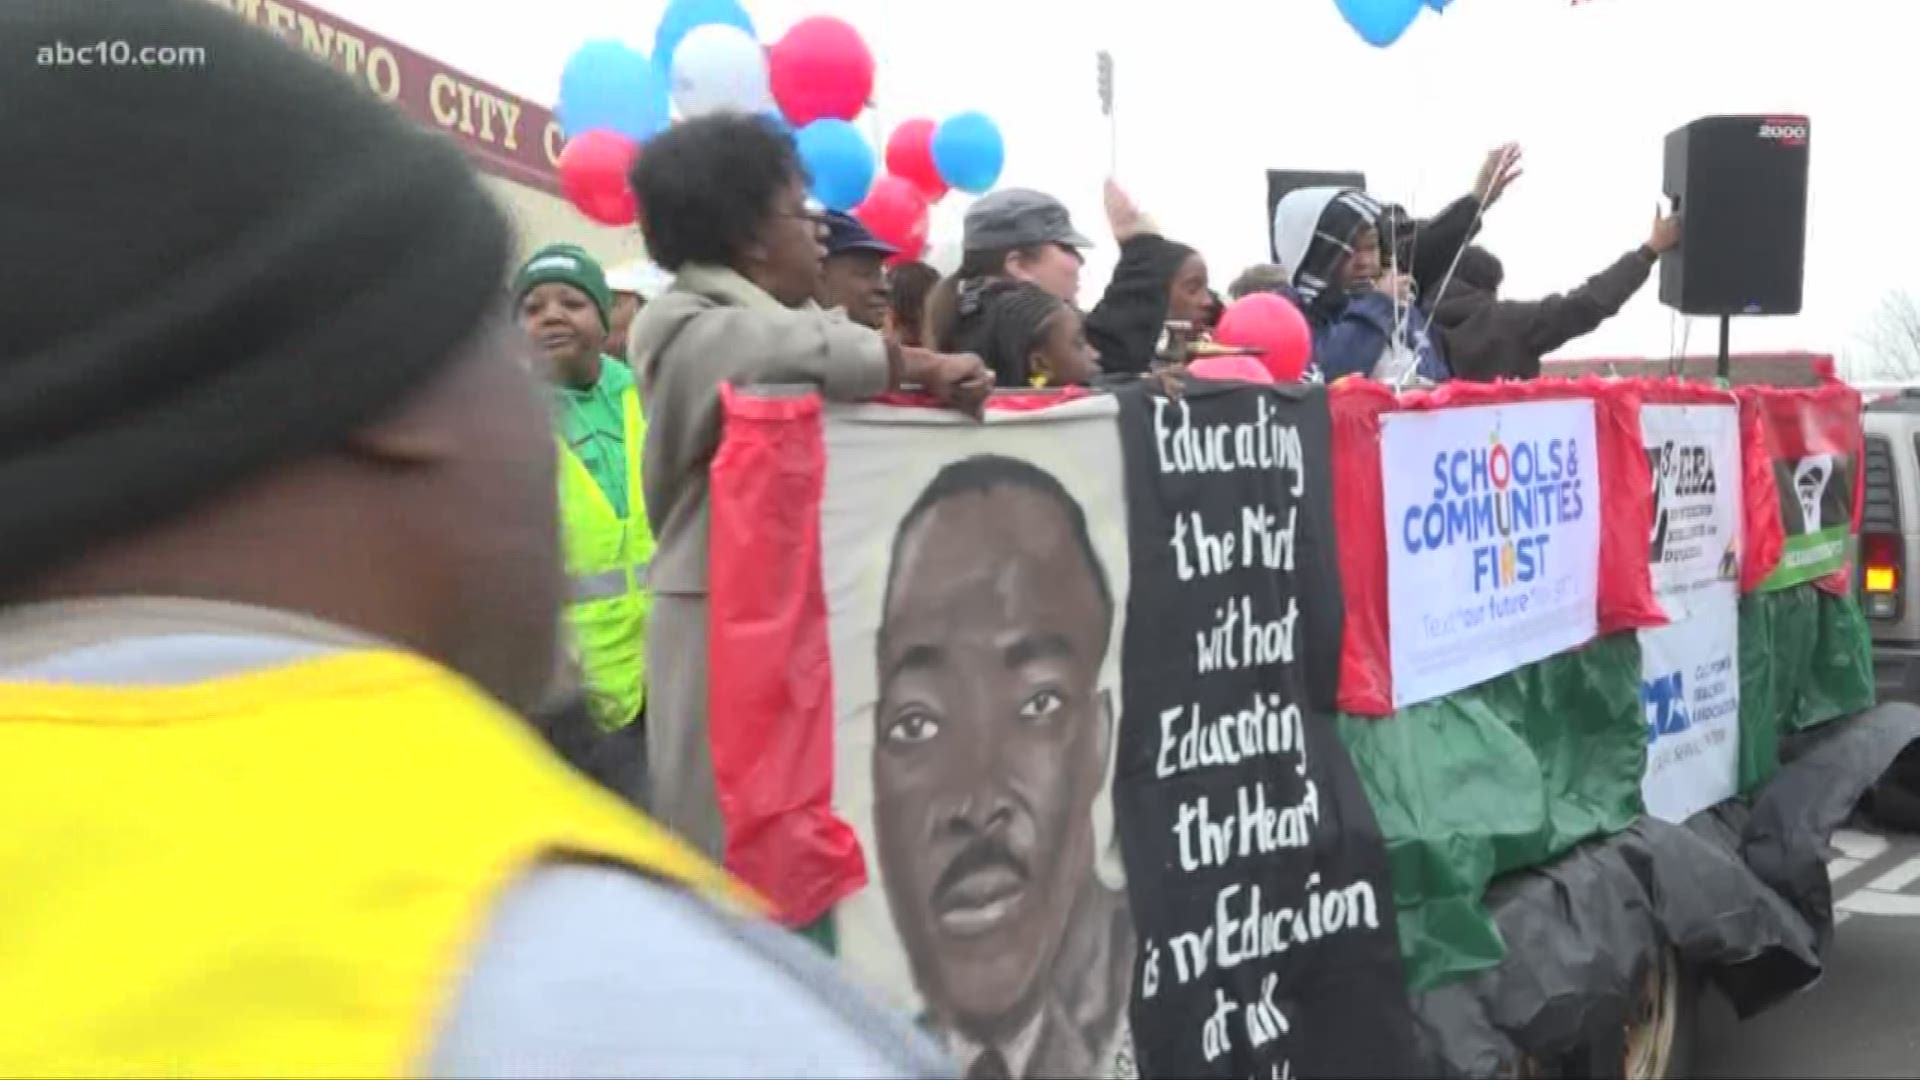 Thousands marched together in Sacramento to honor the life of Martin Luther King Jr. and his legacy.